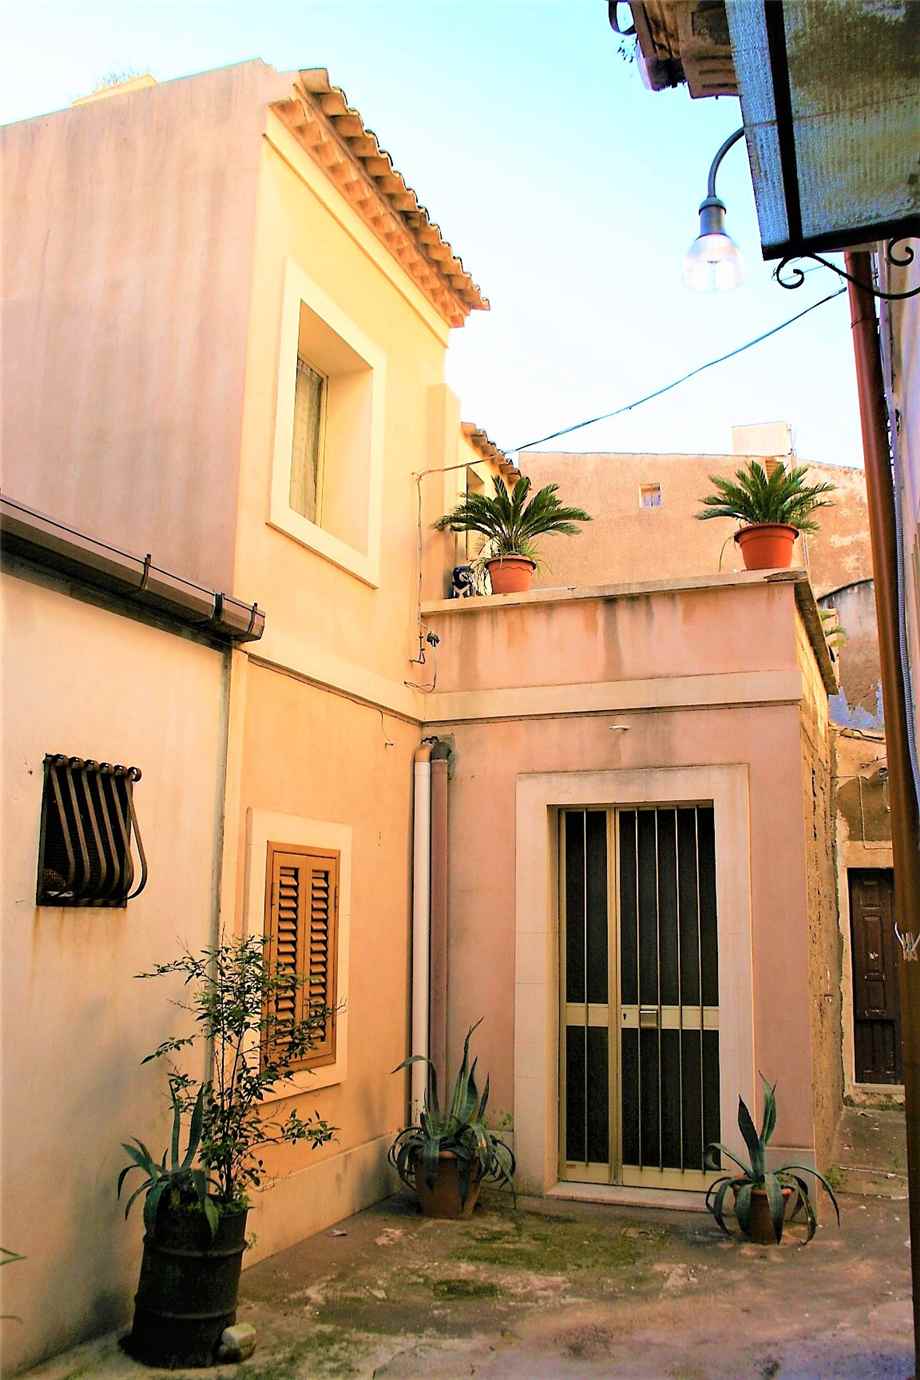 For sale Detached house Noto  #206C n.2